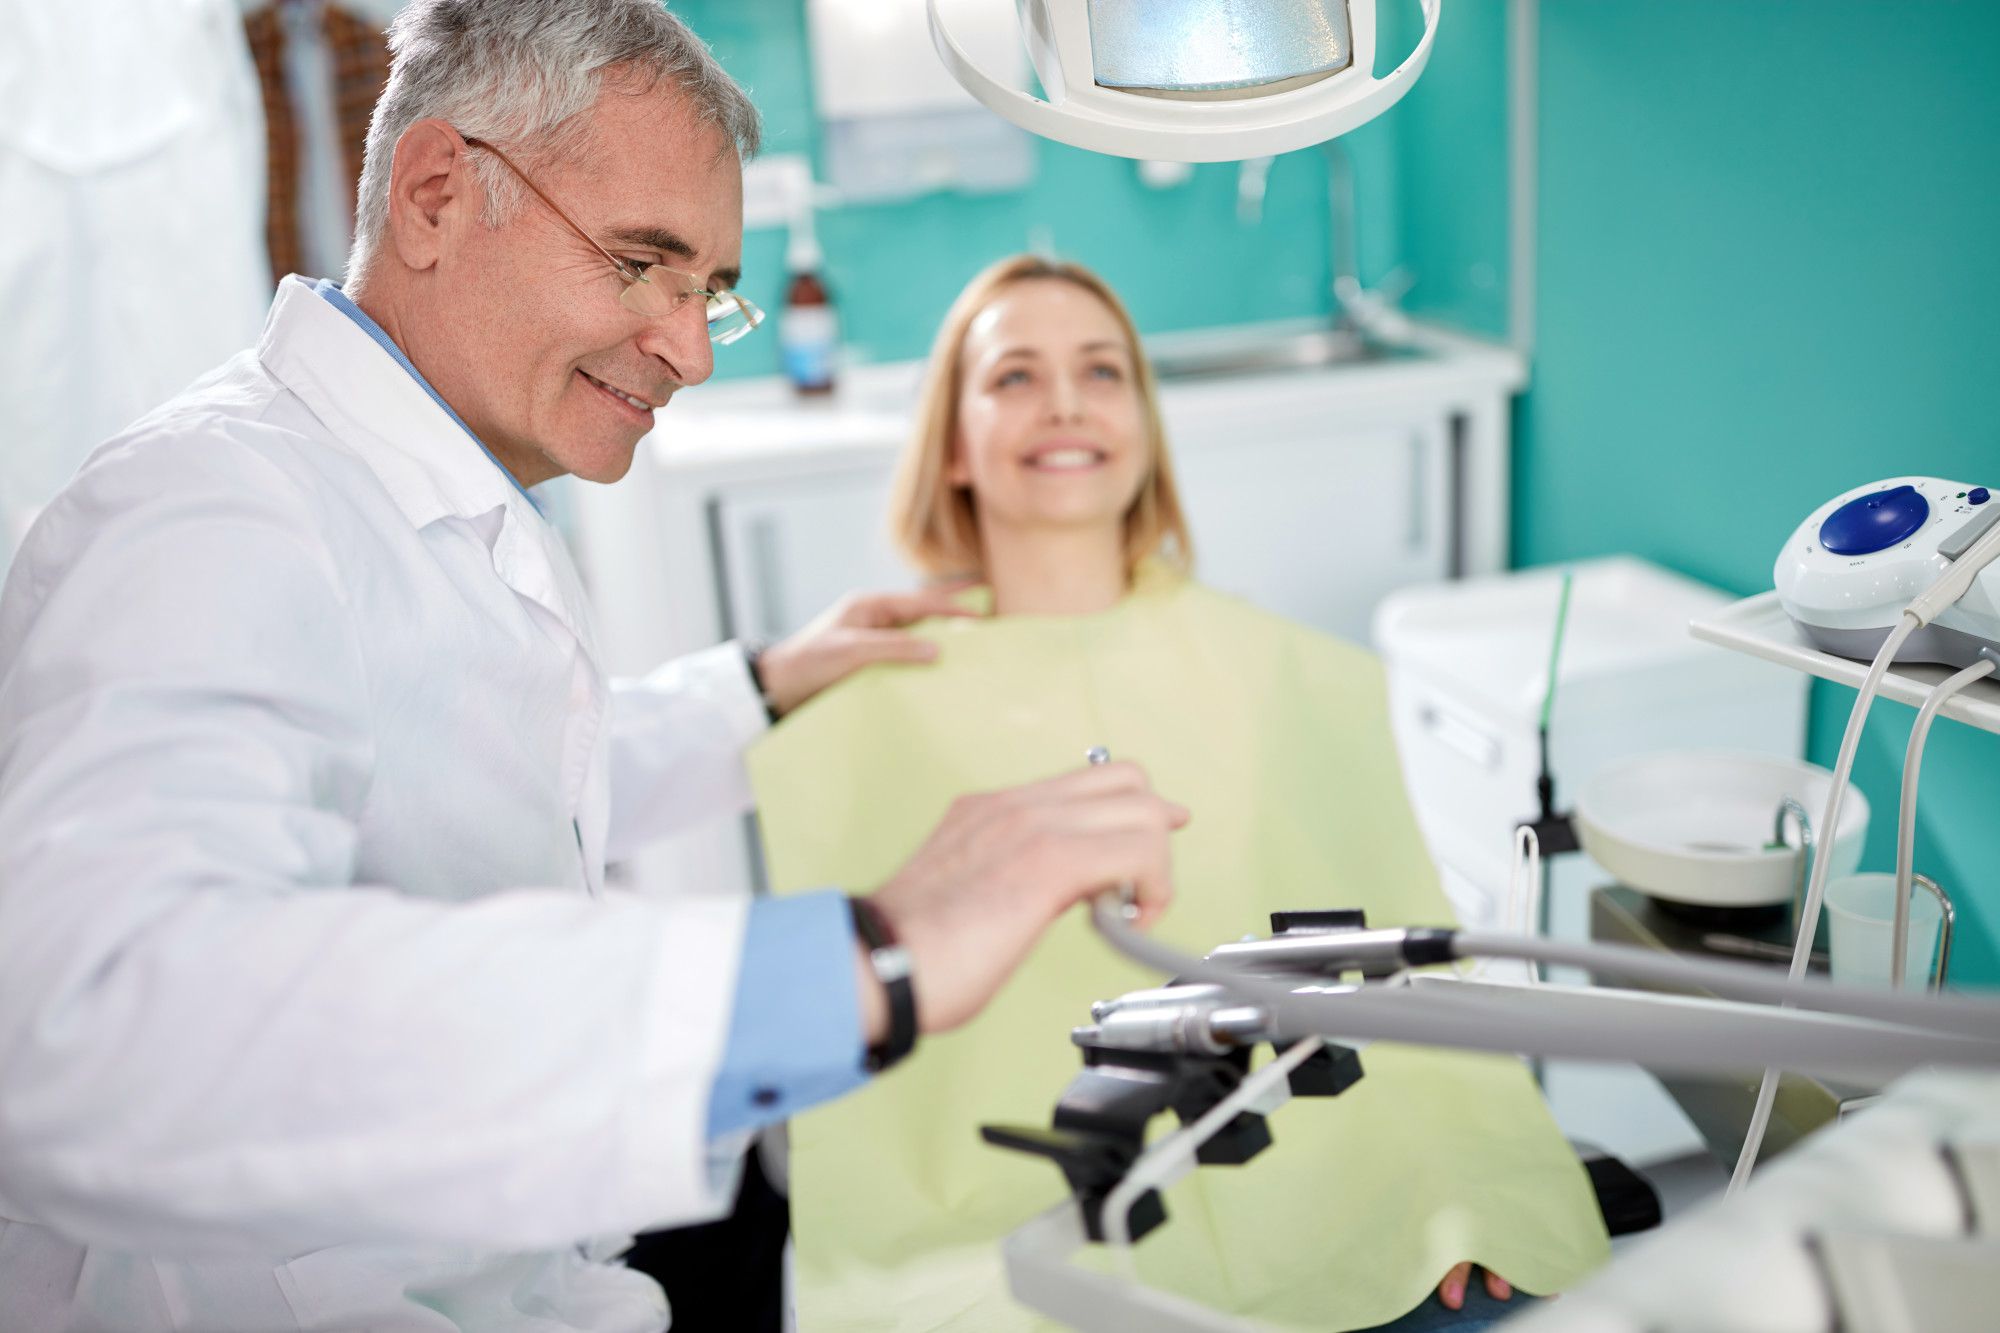 Male dentist with patient in dental practice choose instrument for work